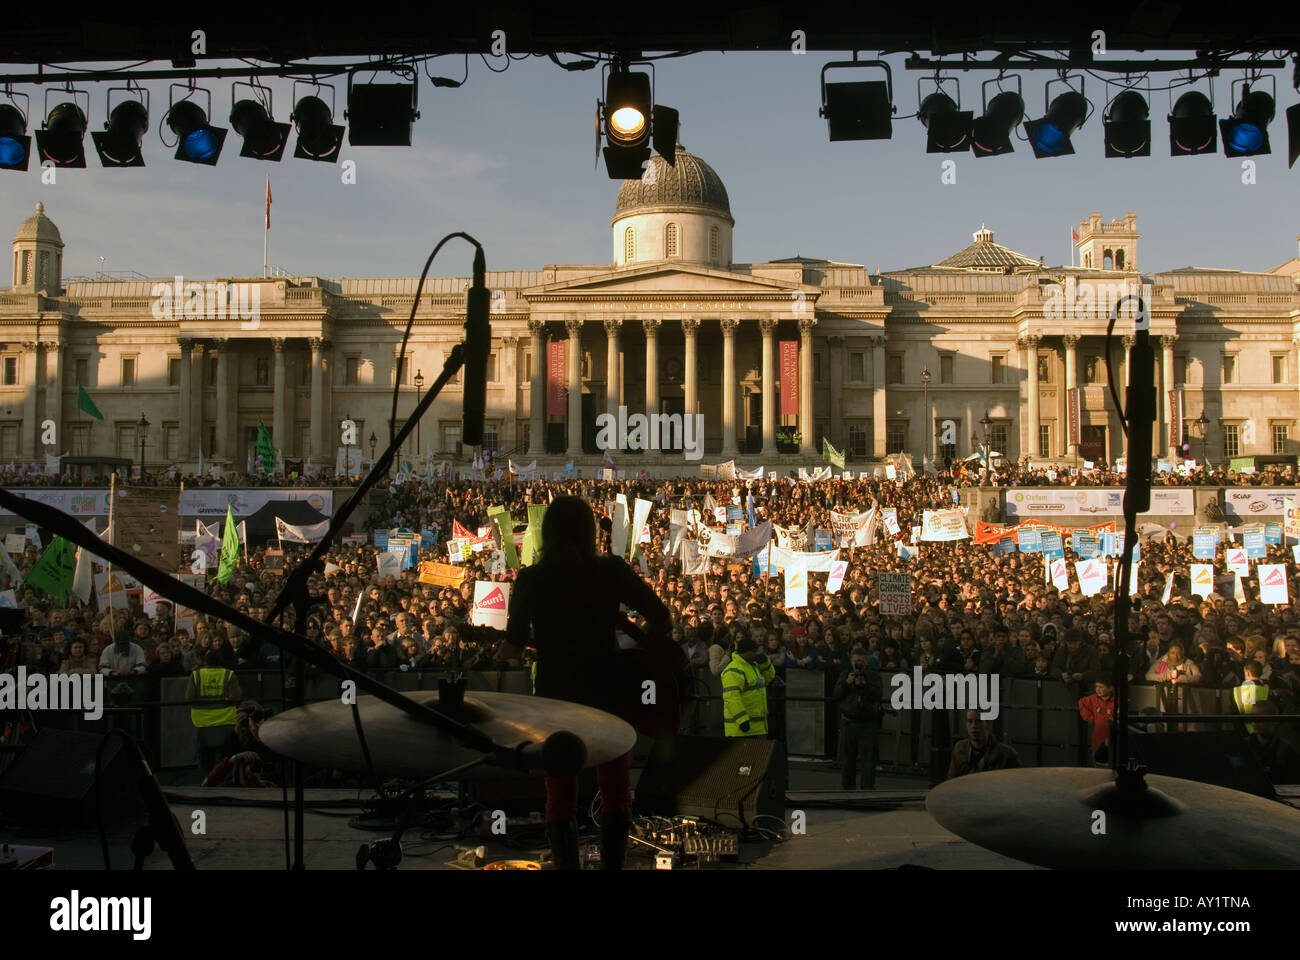 KT Tunstall performing on stage during Stop Climate Chaos I Count rally, Trafalgar Square, London, UK. Saturday, 4 November 2006. Stock Photo